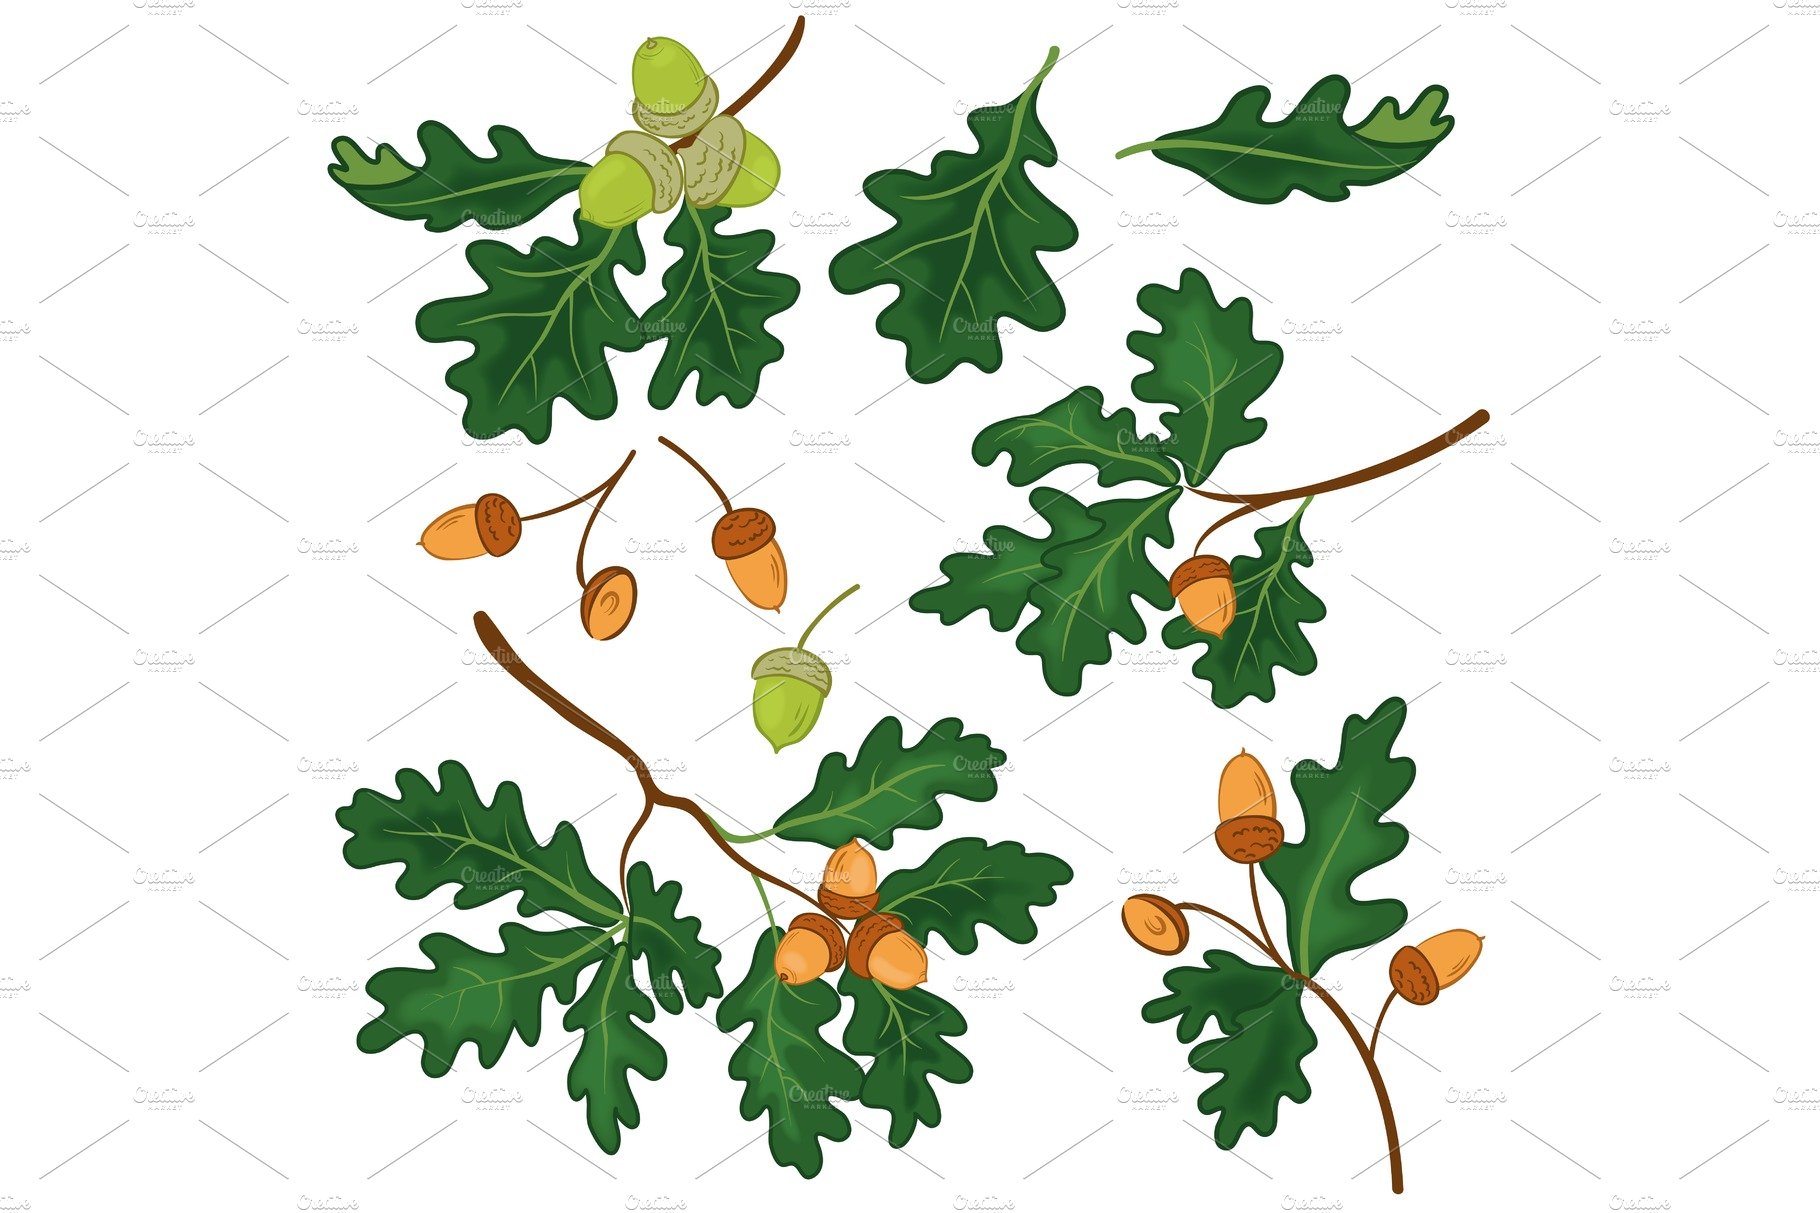 Oak branches with leaves and acorns cover image.